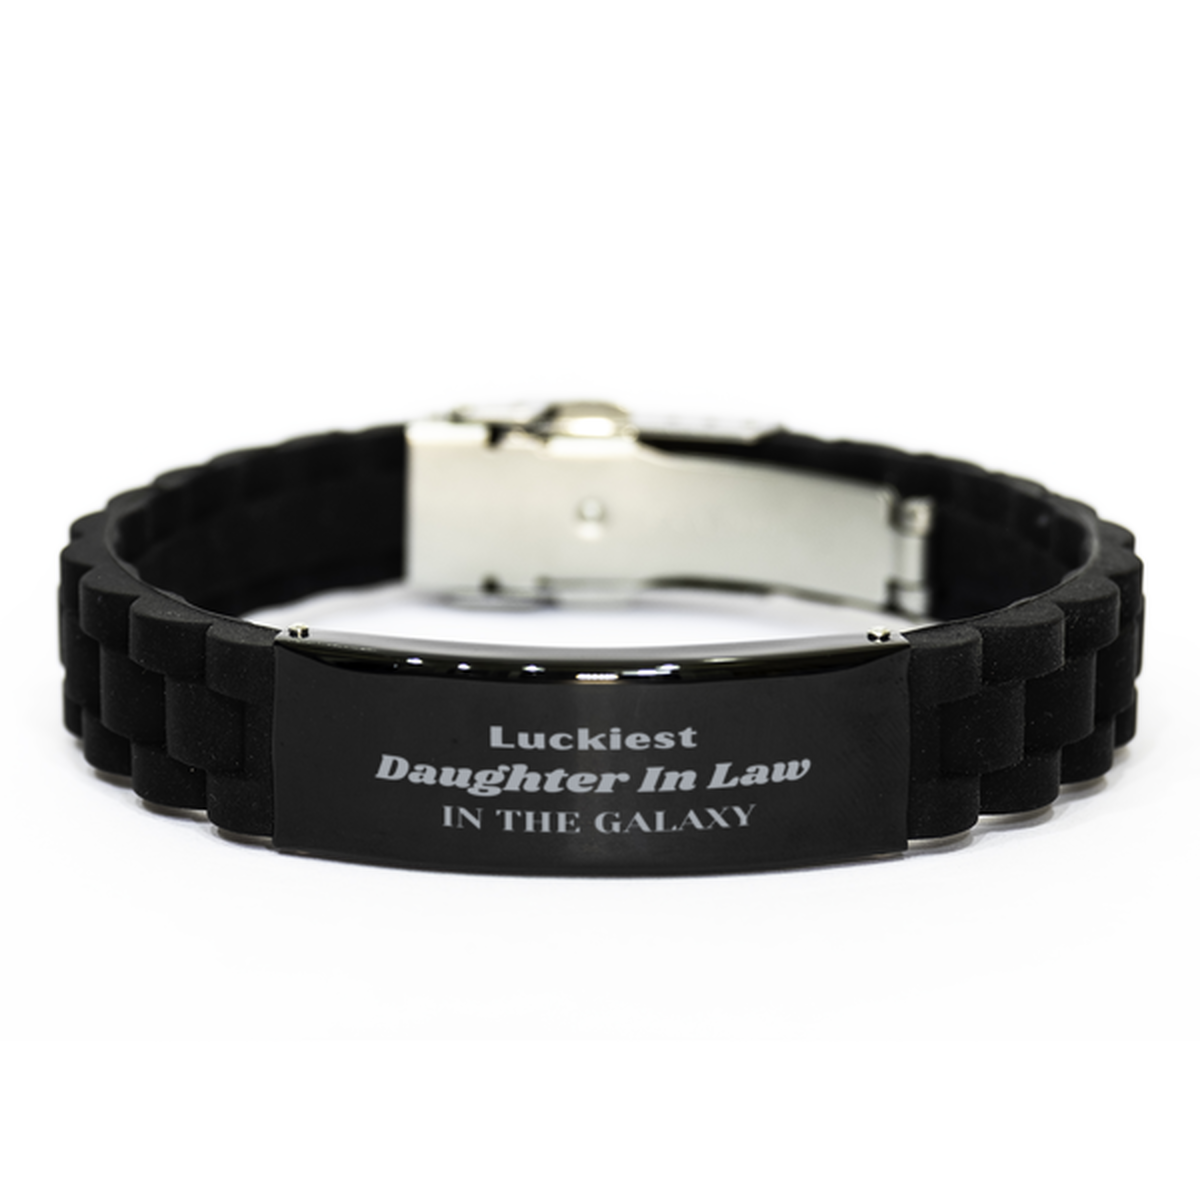 Luckiest Daughter In Law in the Galaxy, To My Daughter In Law Engraved Gifts, Christmas Daughter In Law Black Glidelock Clasp Bracelet Gifts, X-mas Birthday Unique Gifts For Daughter In Law Men Women